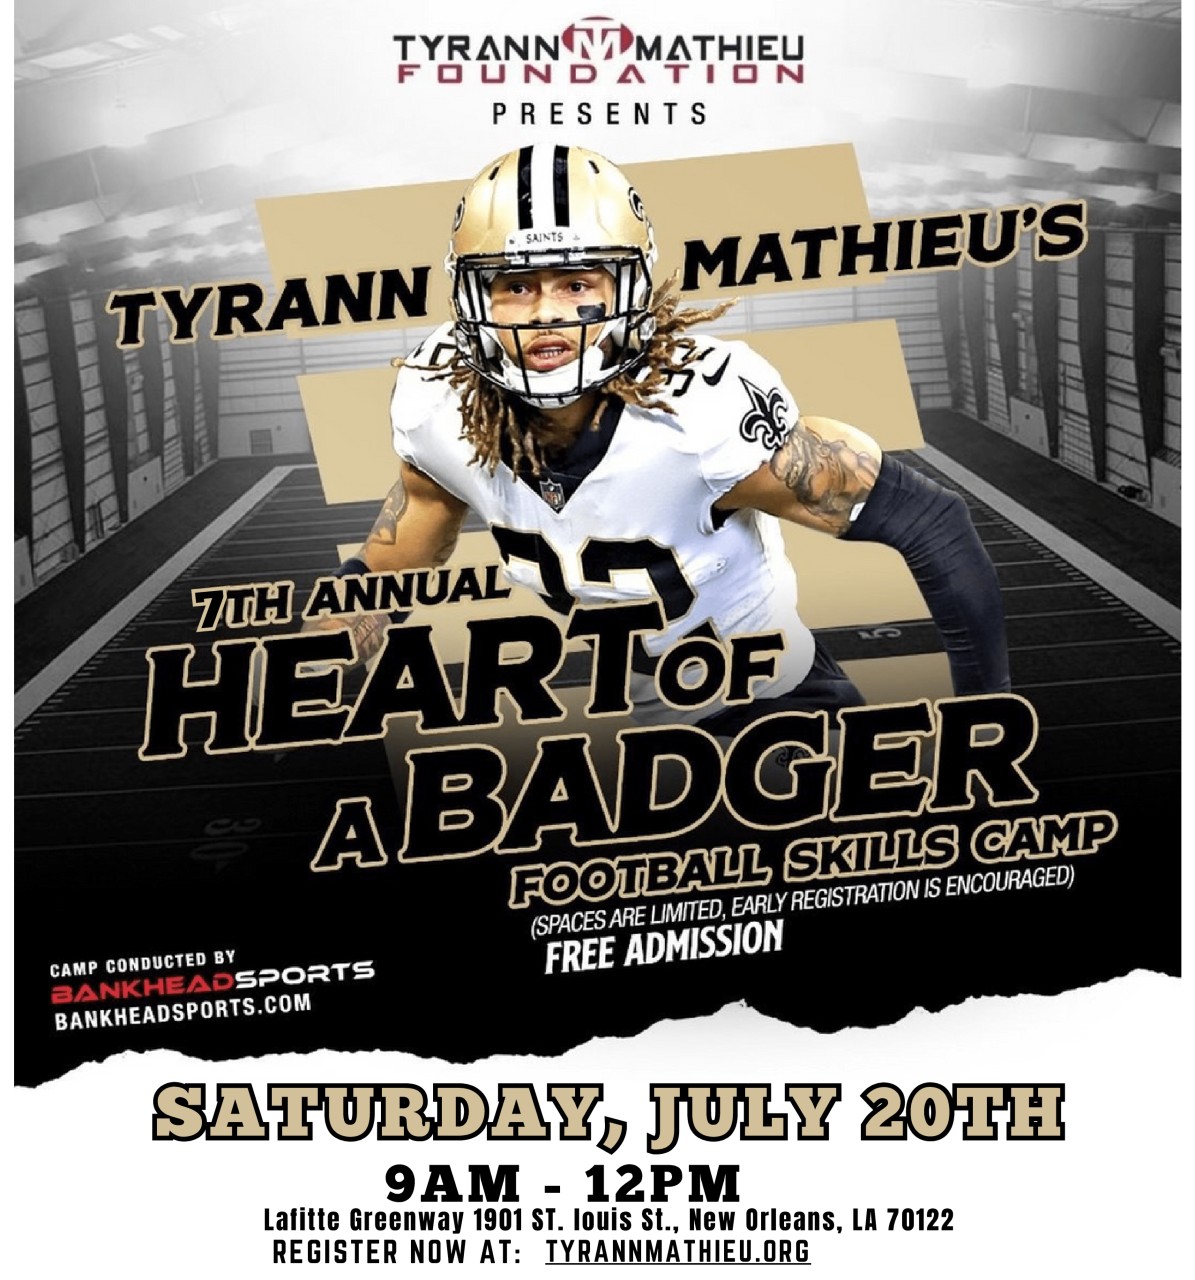 7th Annual Heart of a Badger Football Skills Camp